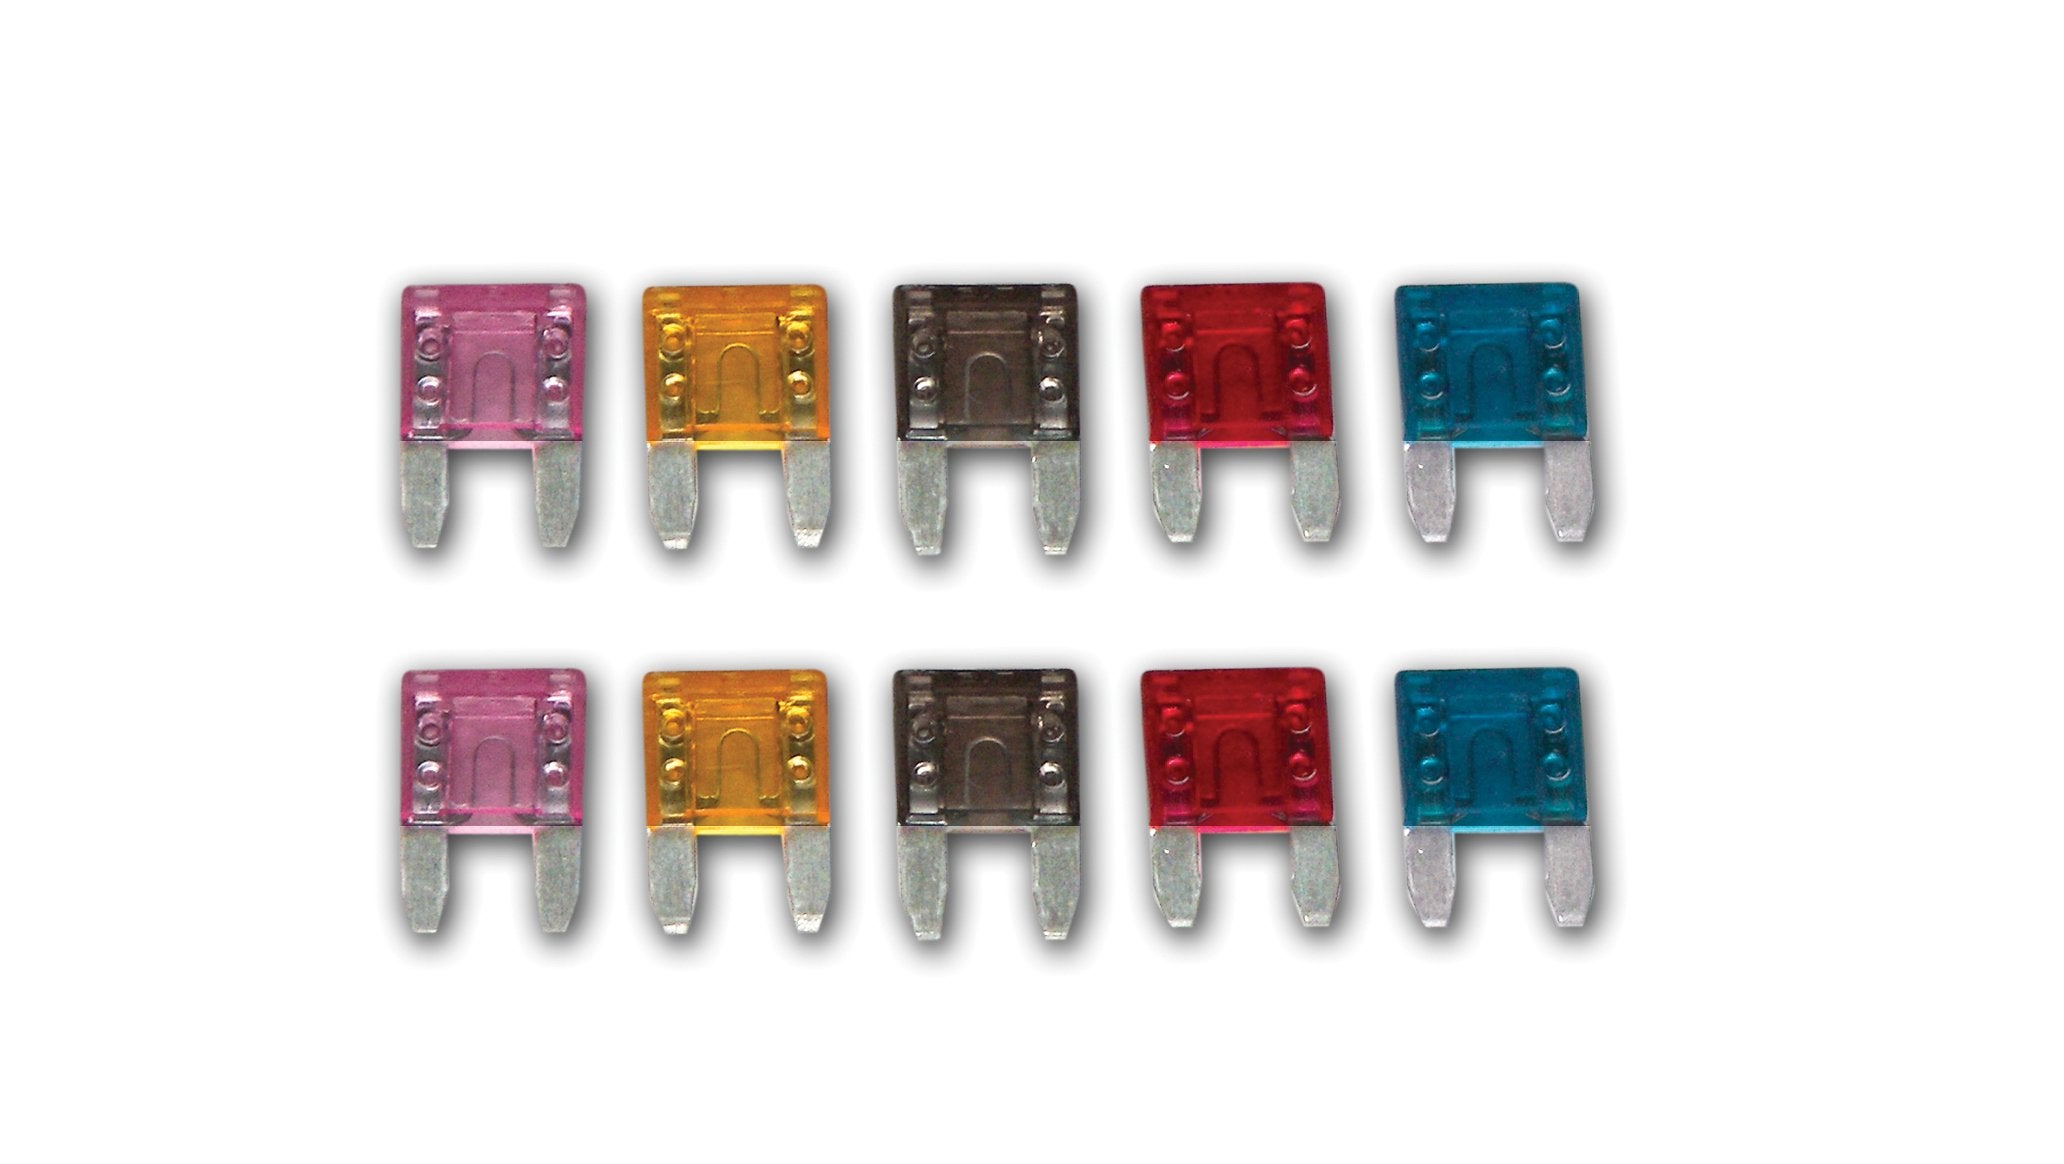 WirthCo 24103 Battery Doctor ATM LED Mini-Fuse, (Pack of 10)